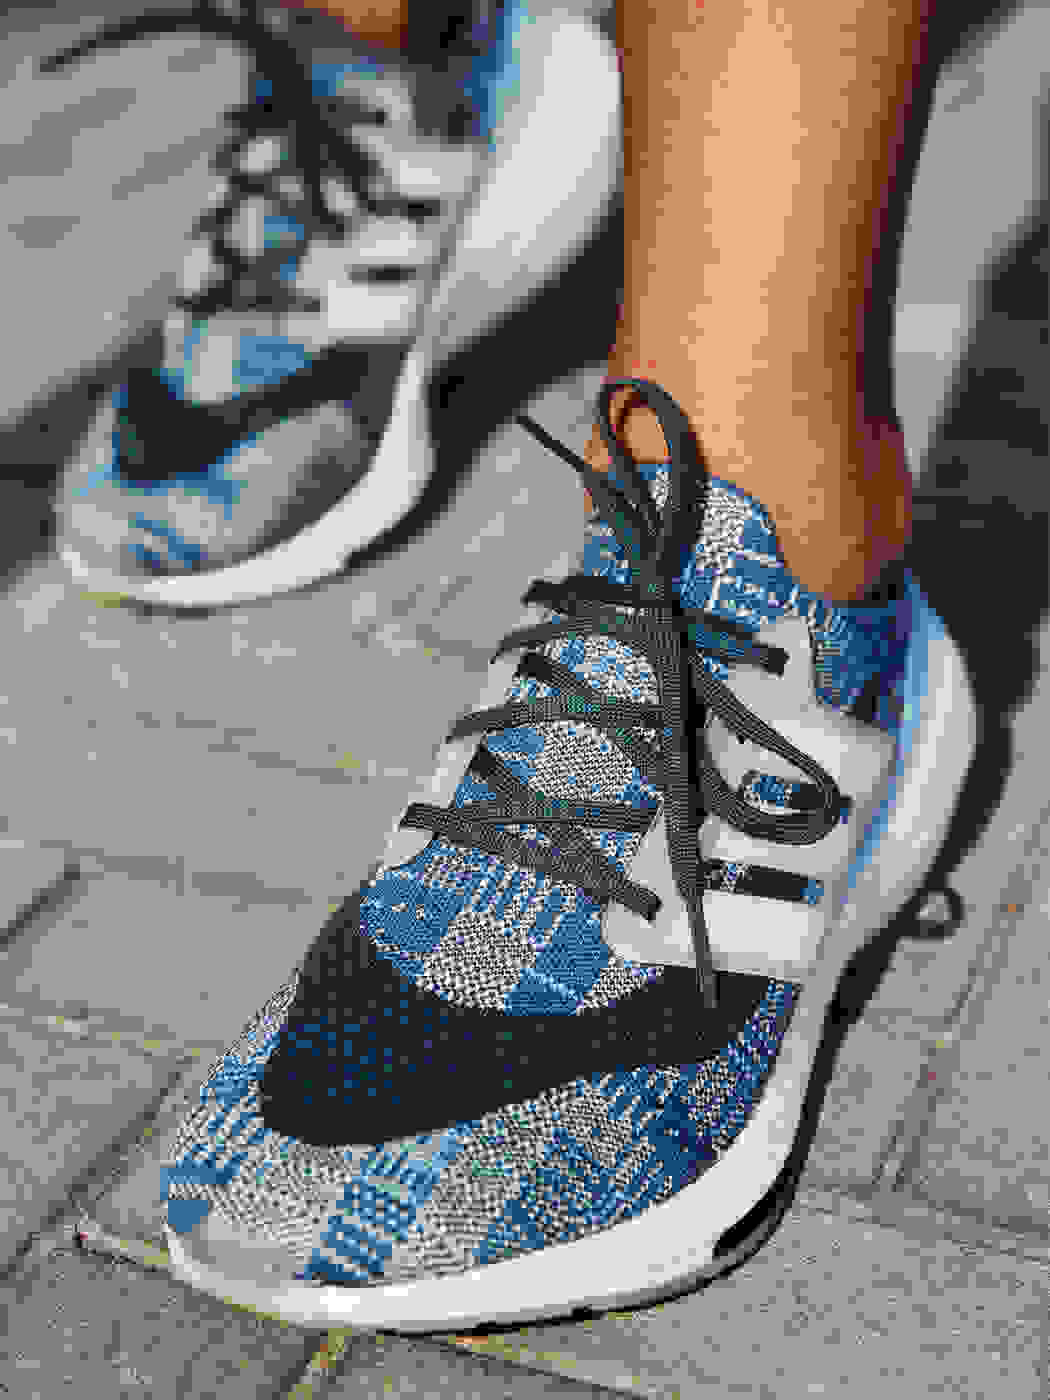 A person is wearing Primeblue Ultraboost 21 running shoes